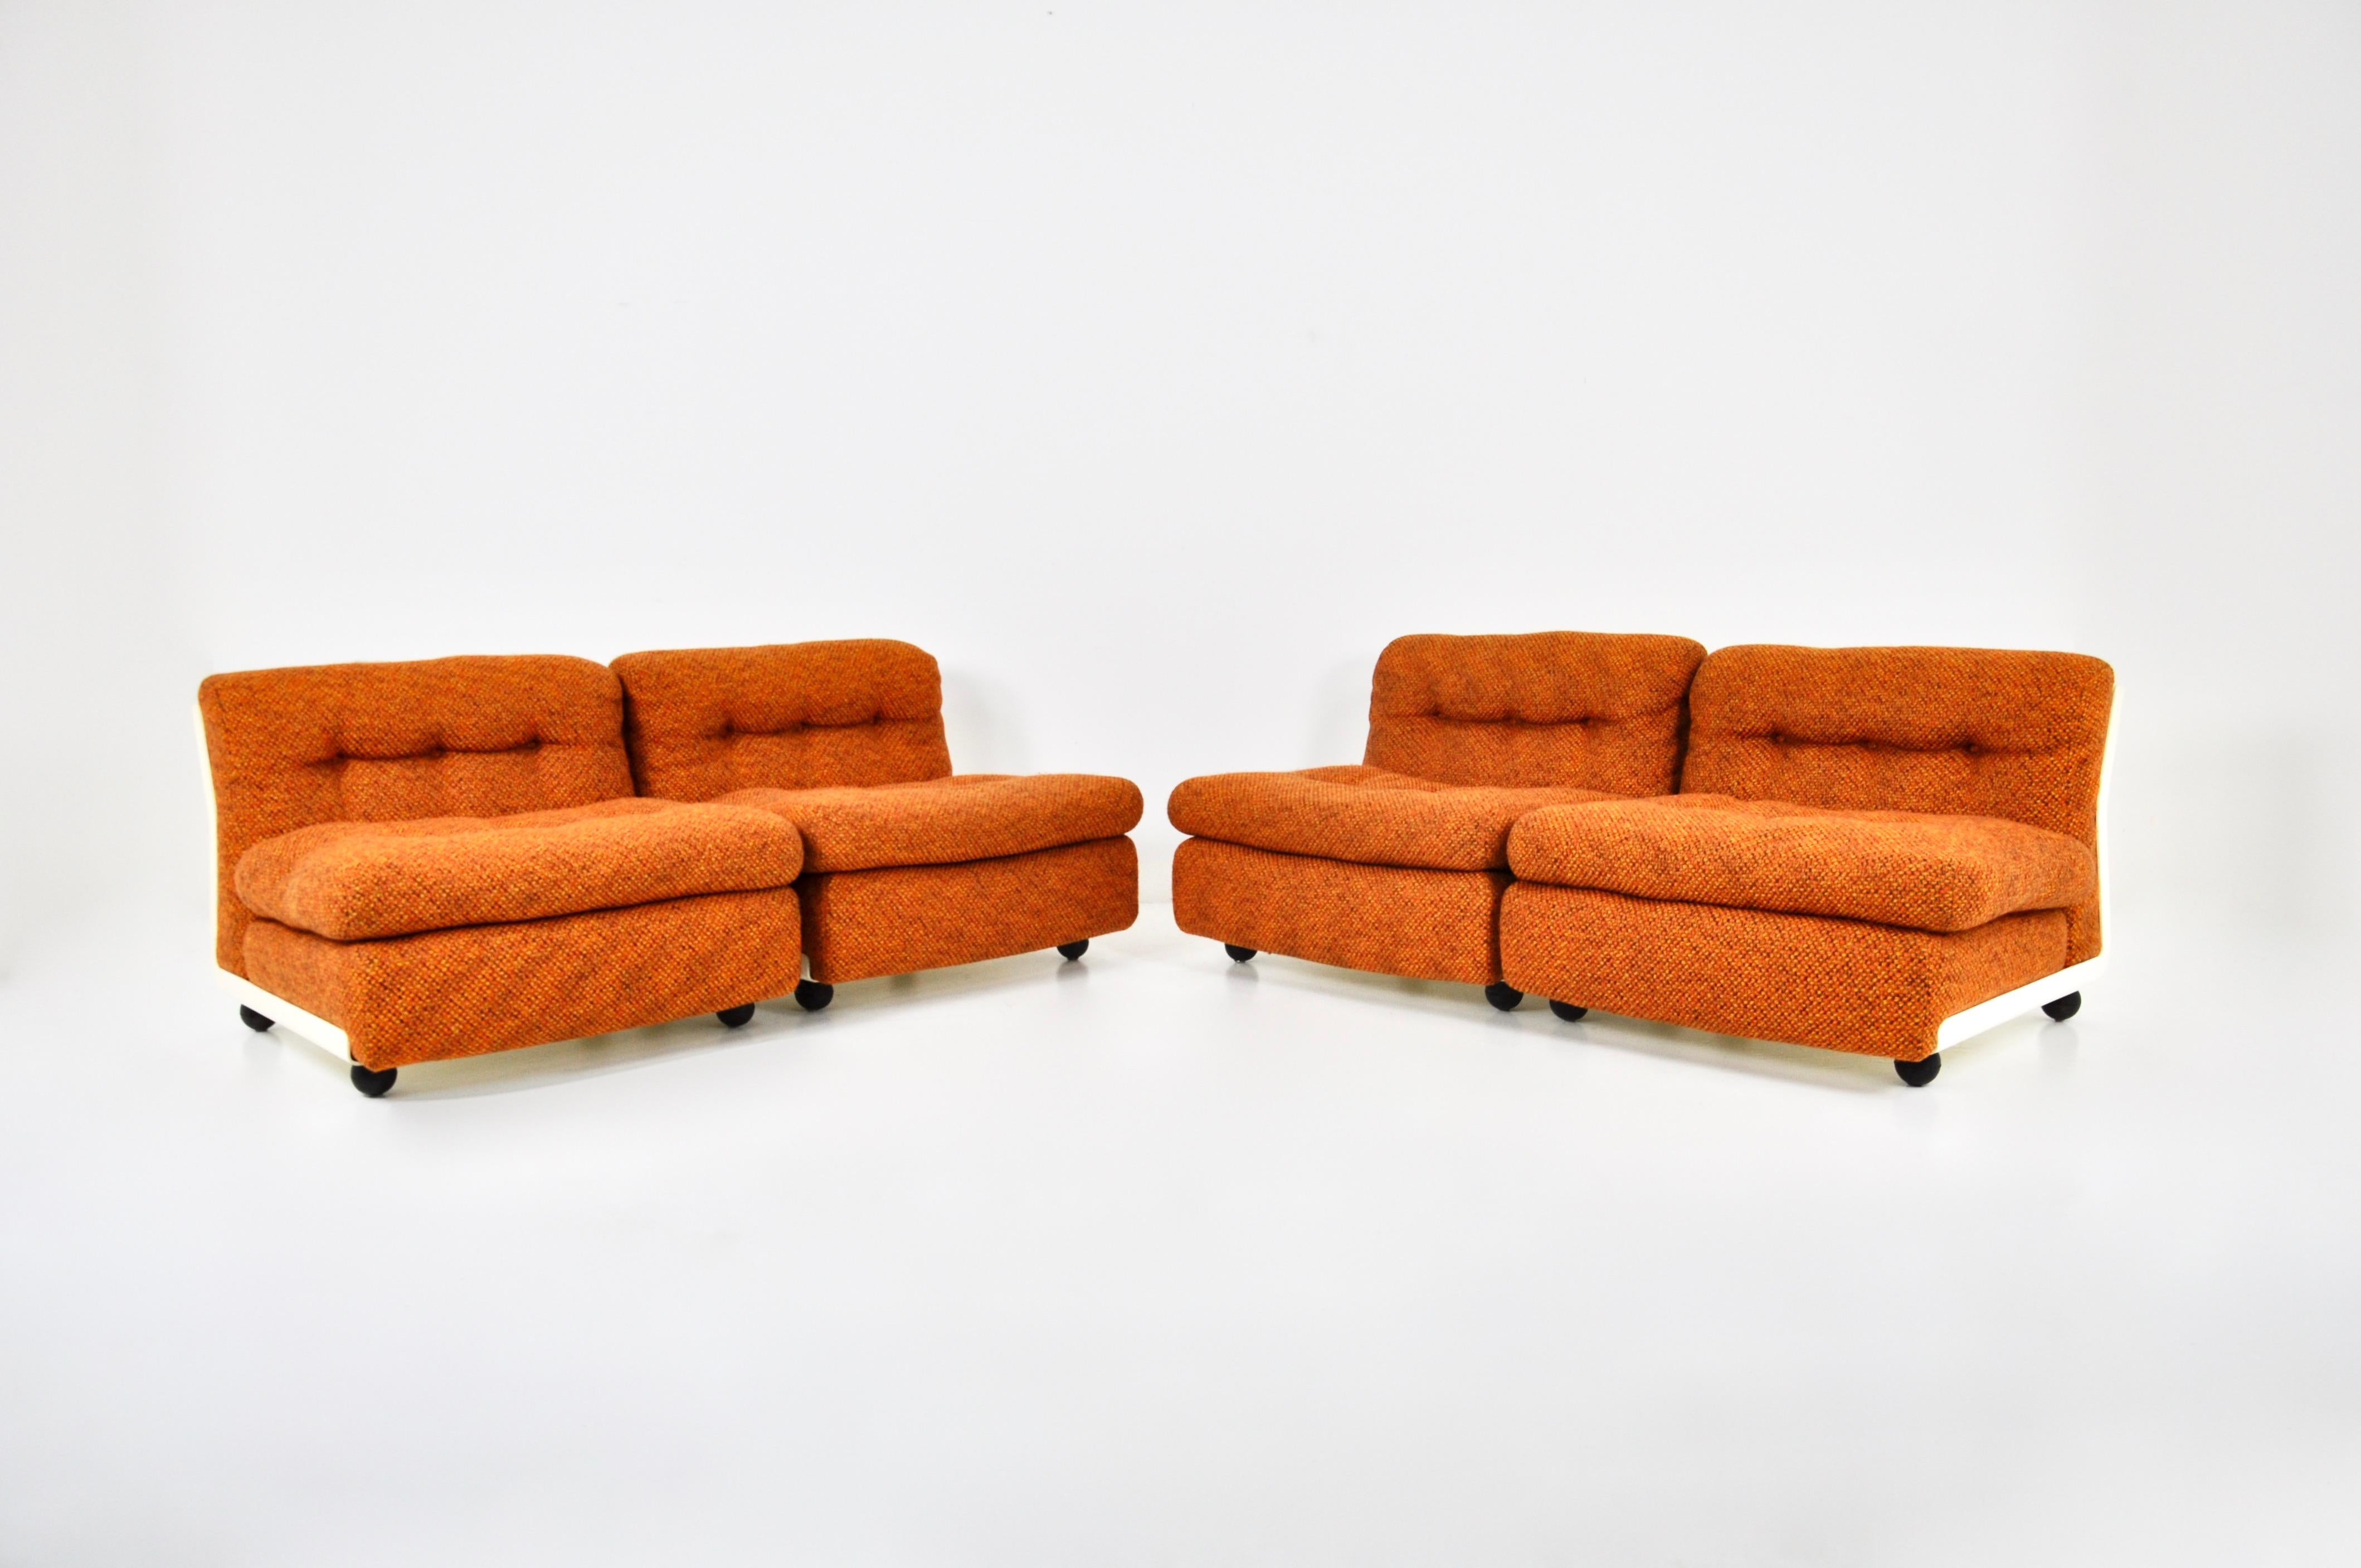 Mid-20th Century Amanta Lounge chairs by Mario Bellini for C&B Italia, 1960s, set of 4 For Sale